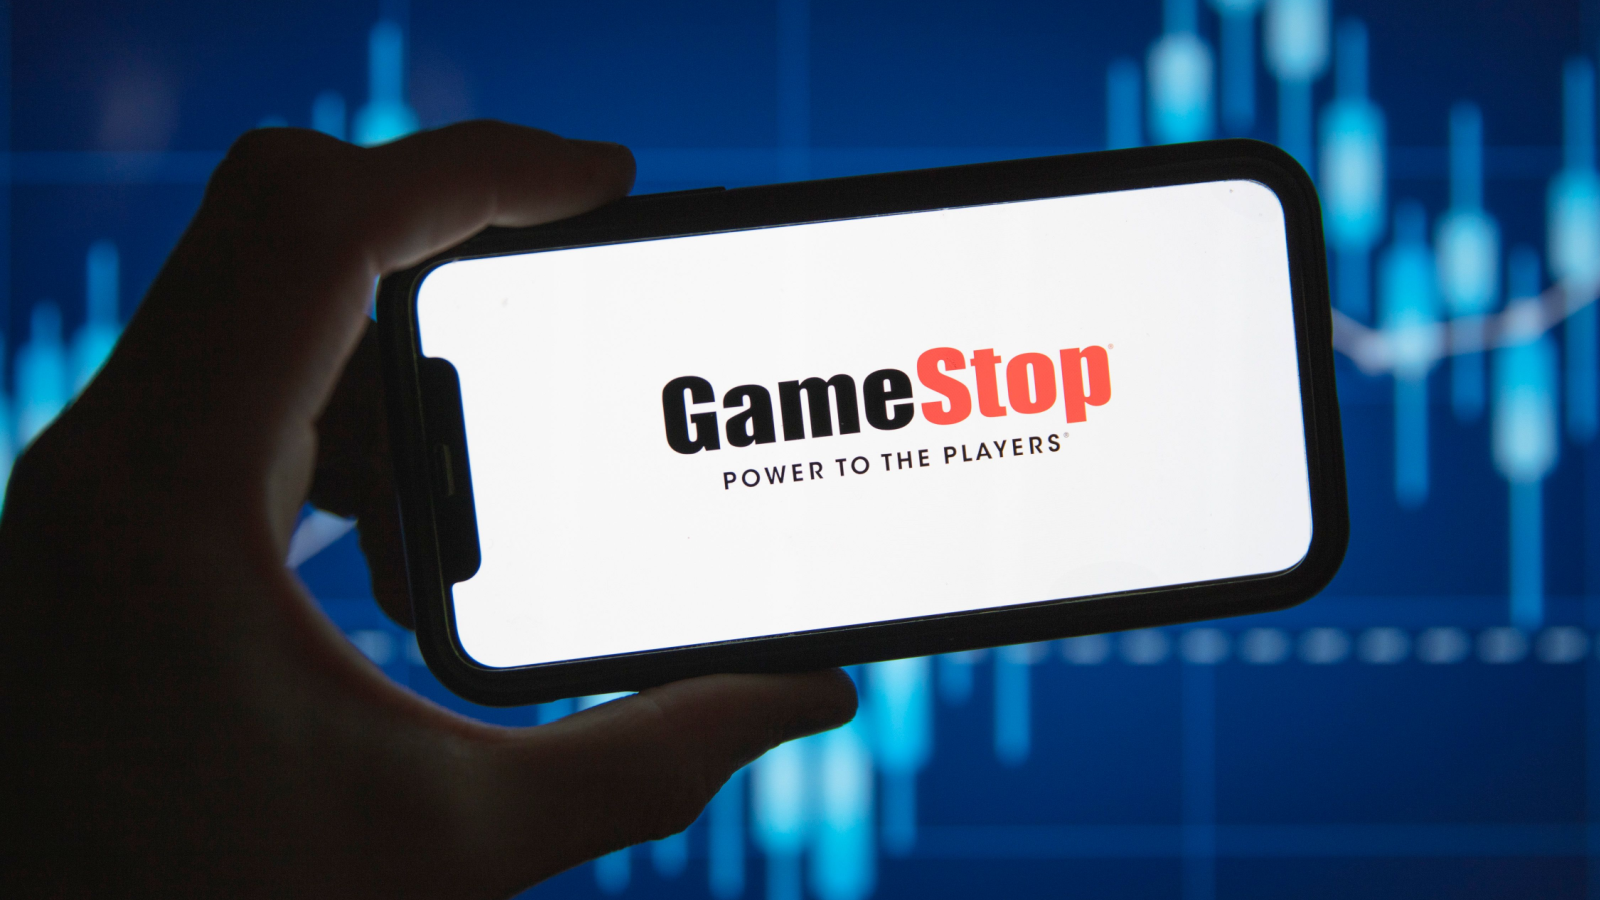 GME Stock Alert: Ryan Cohen Issues Warning to GameStop Employees